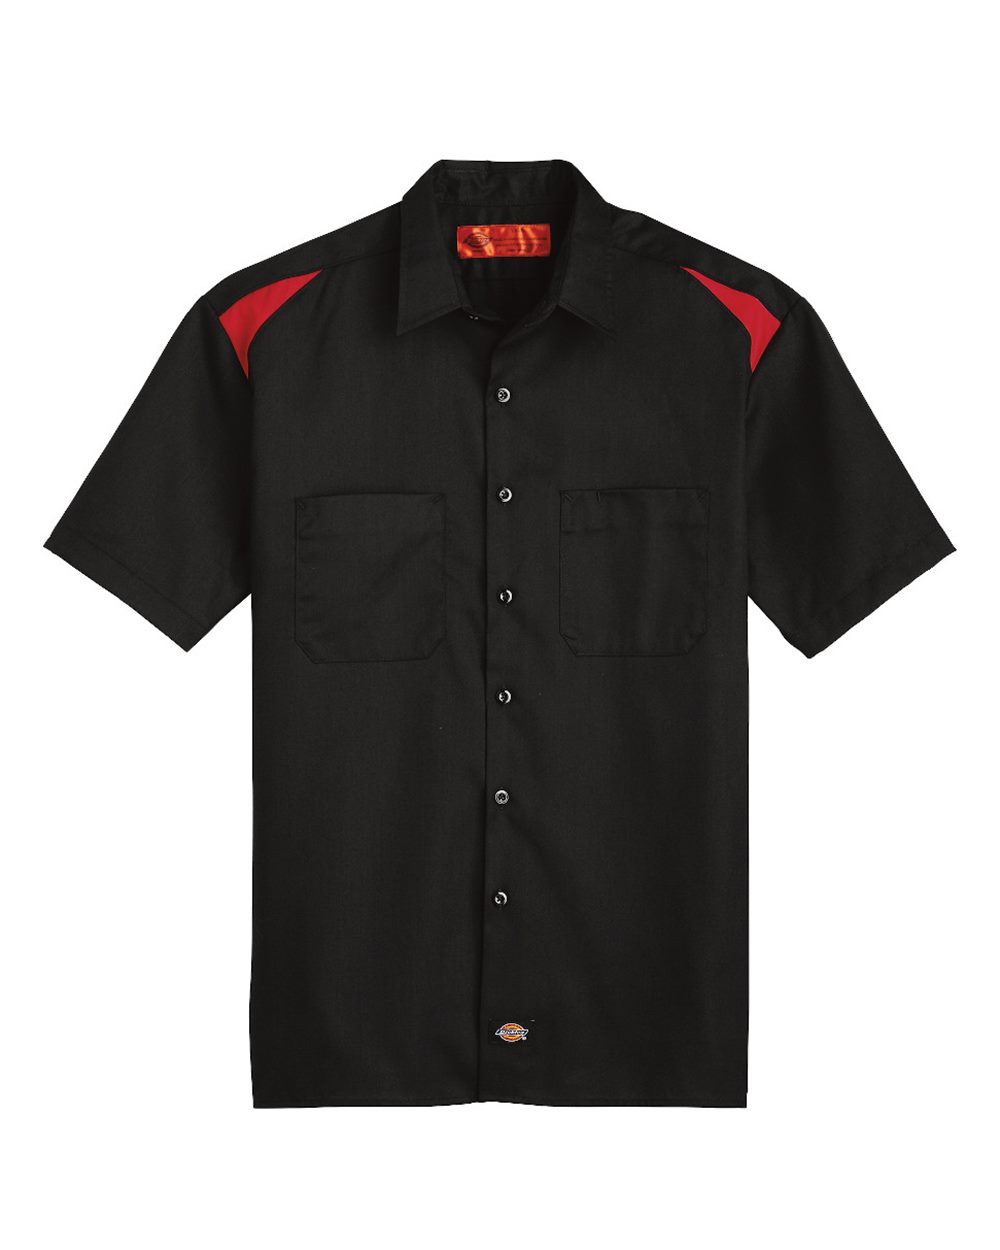 Dickies Workwear LS605 Men's 4.6 oz. Performance button up shirt - From ...